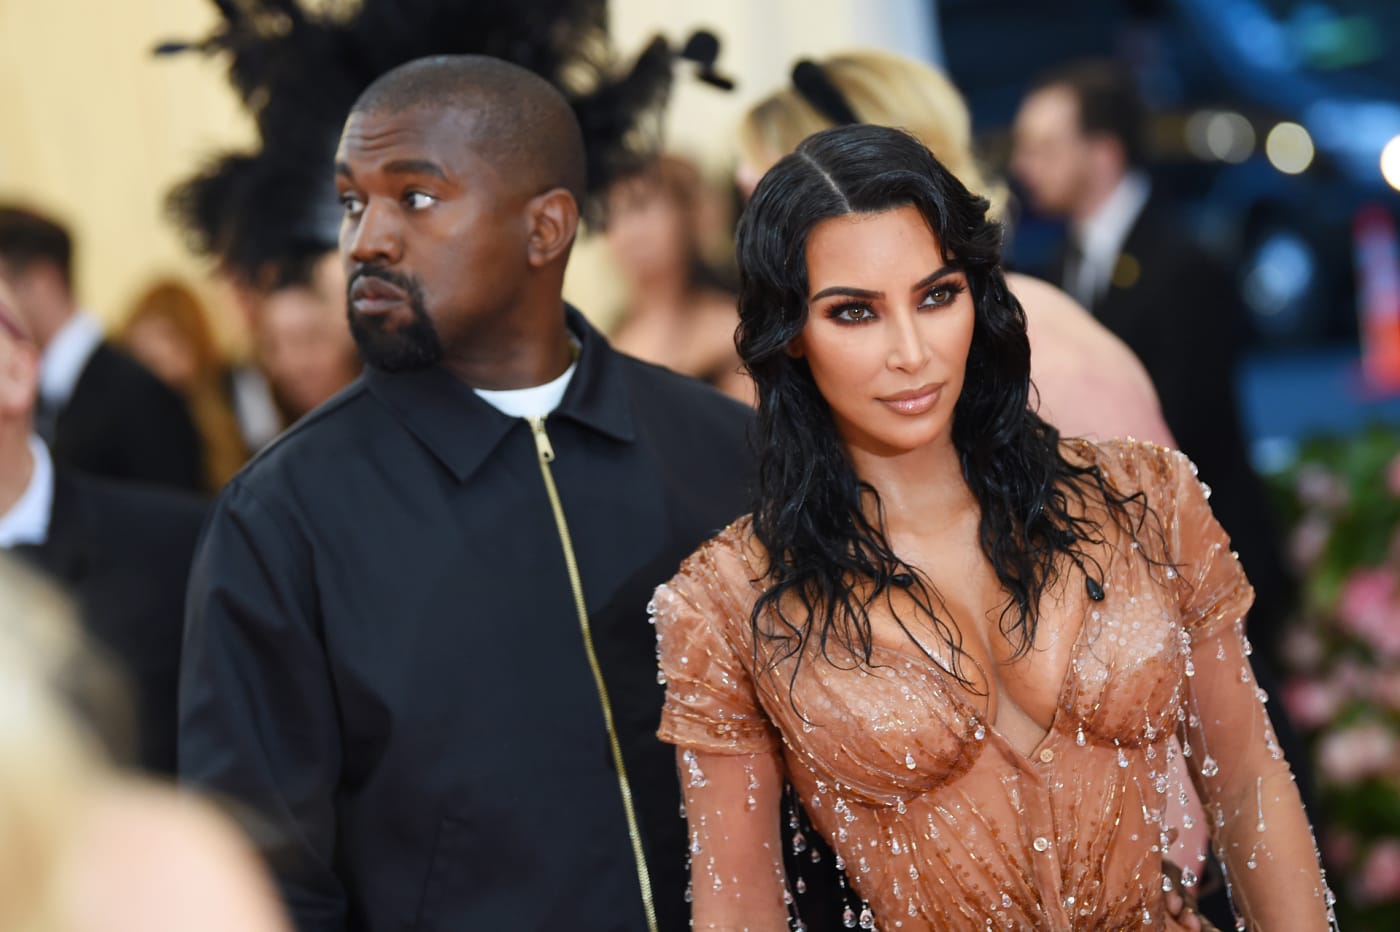 Kim Kardashian West and Kanye West attend The 2019 Met Gala